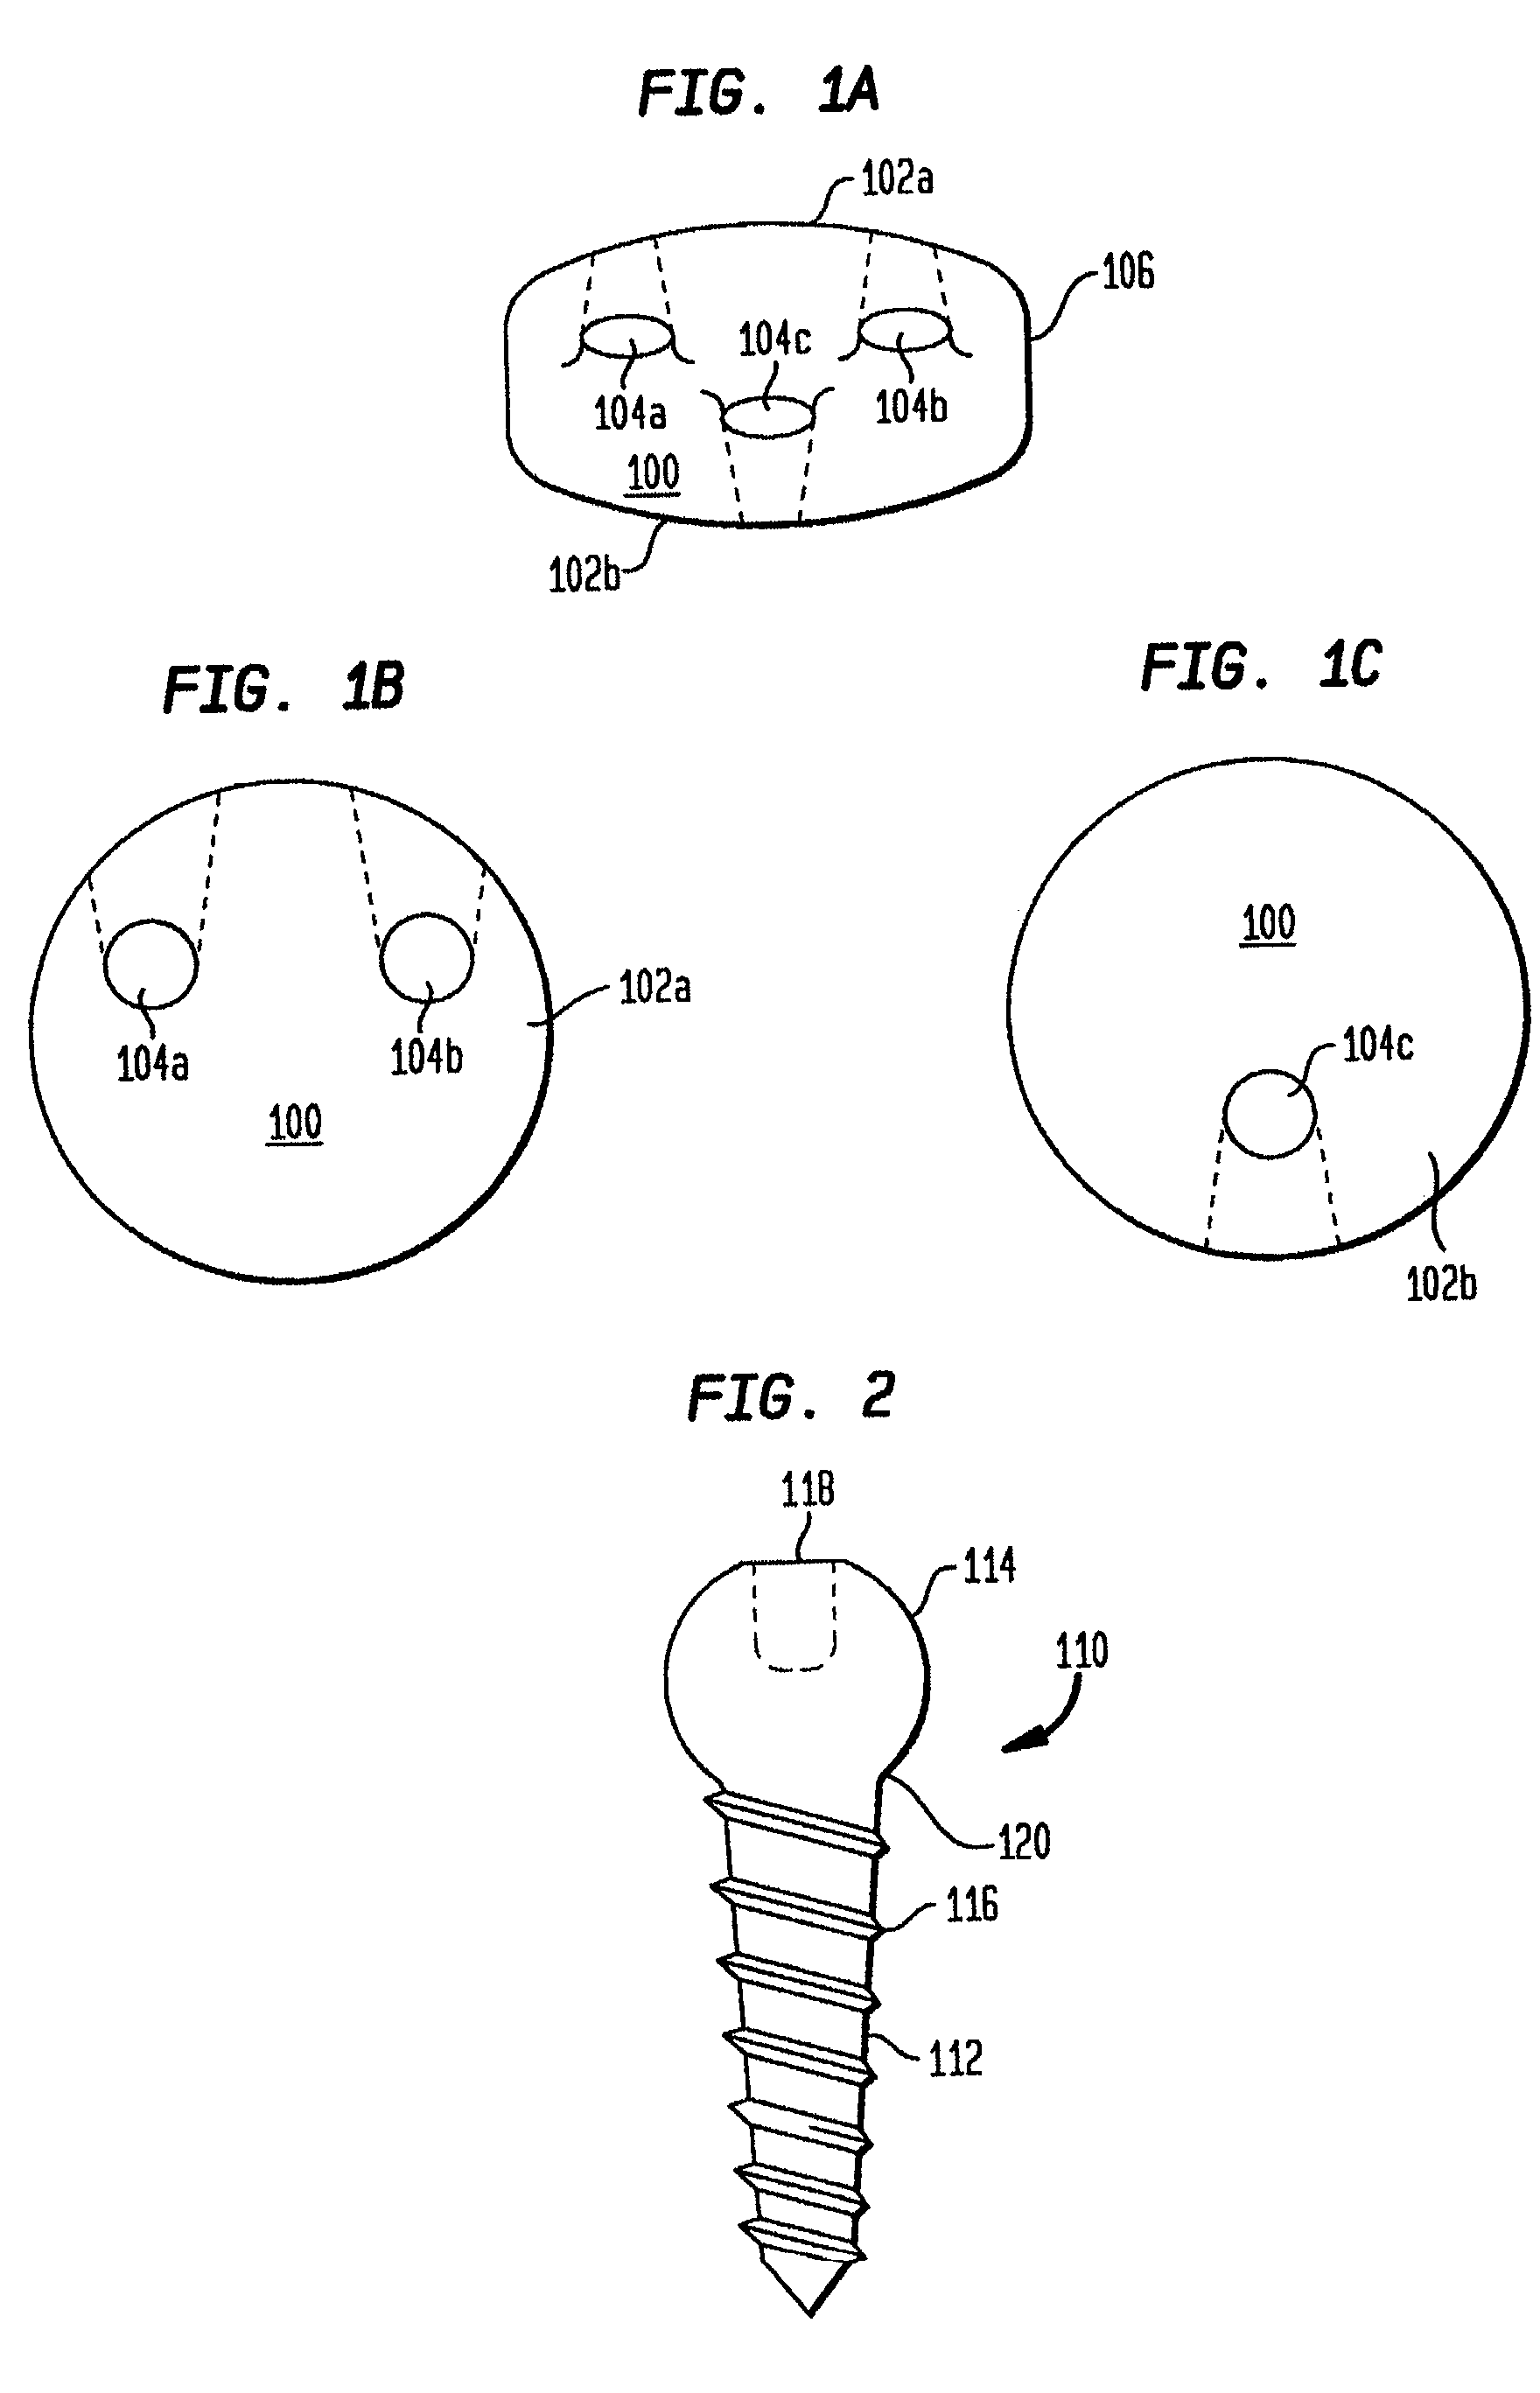 Porous interbody fusion device having integrated polyaxial locking interference screws